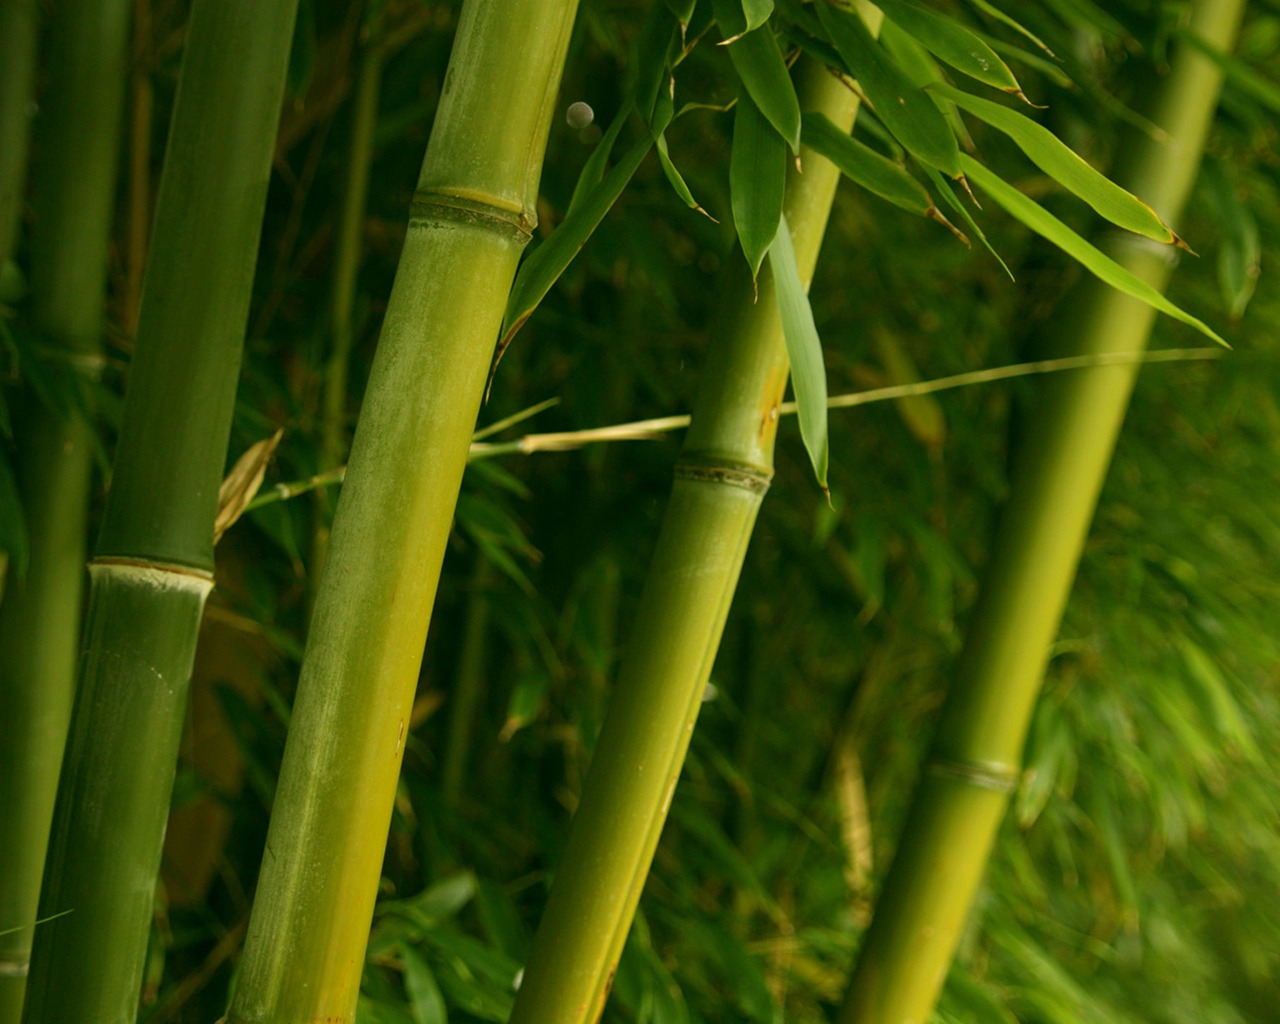 Bamboo Wallpaper Plants Nature Wallpapers in jpg format for free